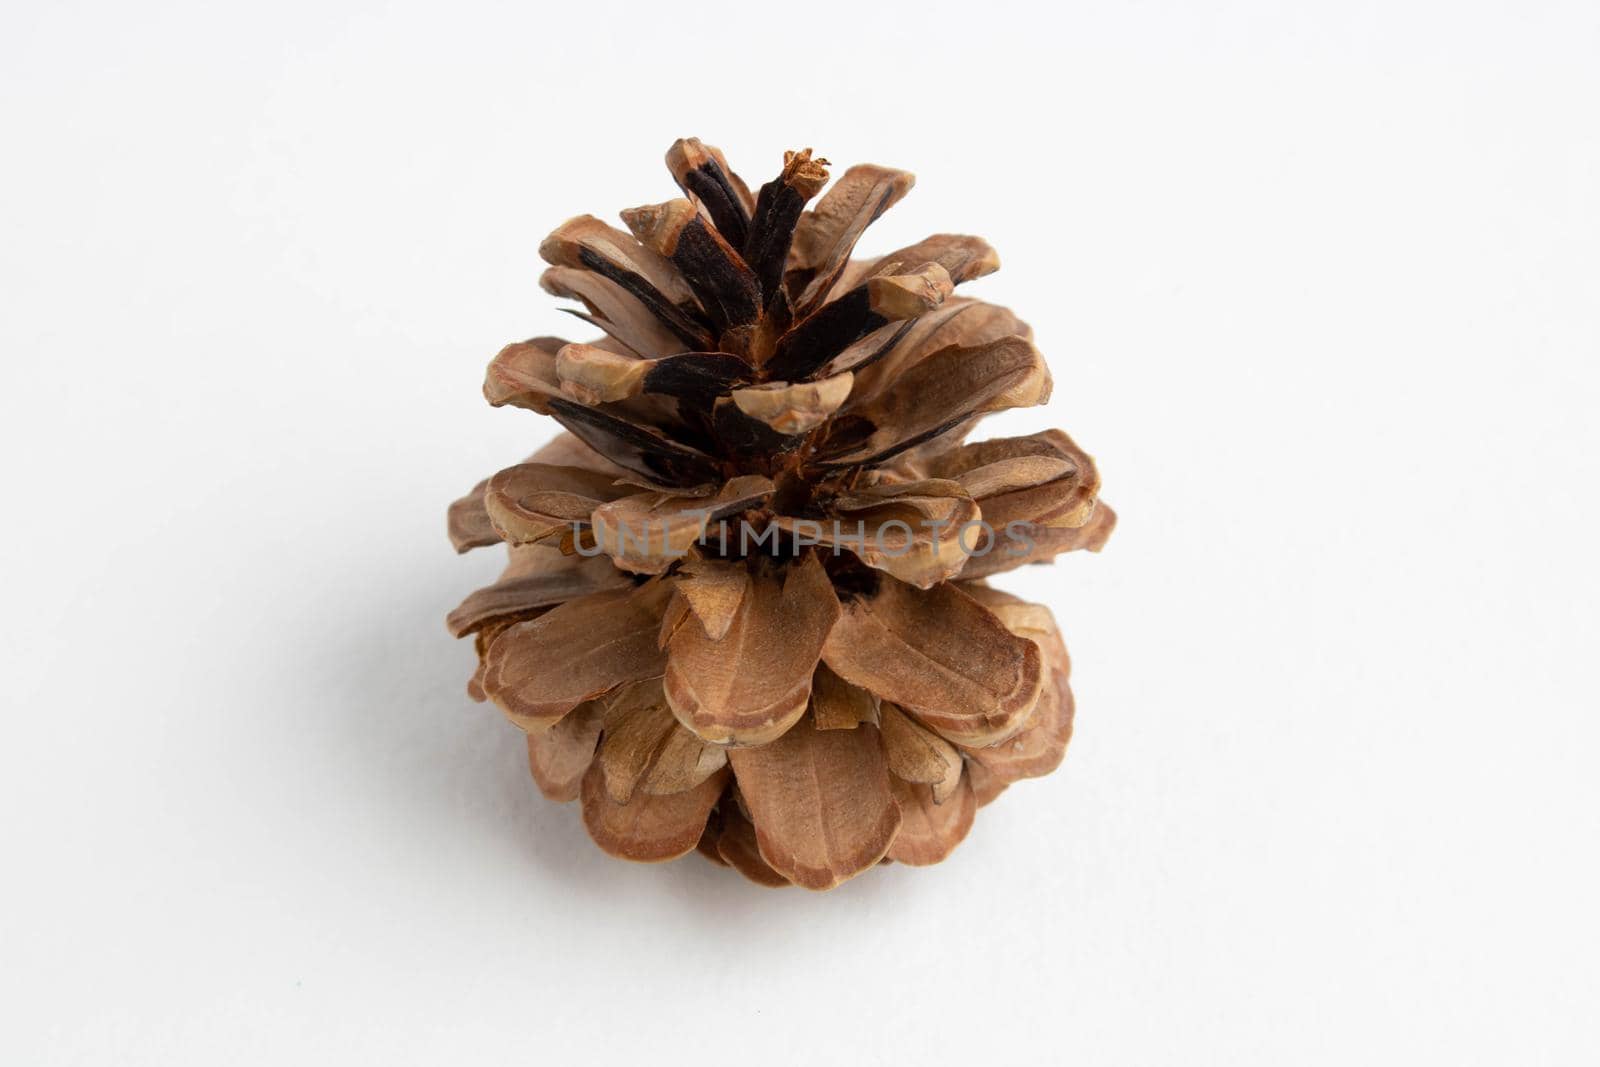 dry open pine cone isolated on a white background. by lapushka62